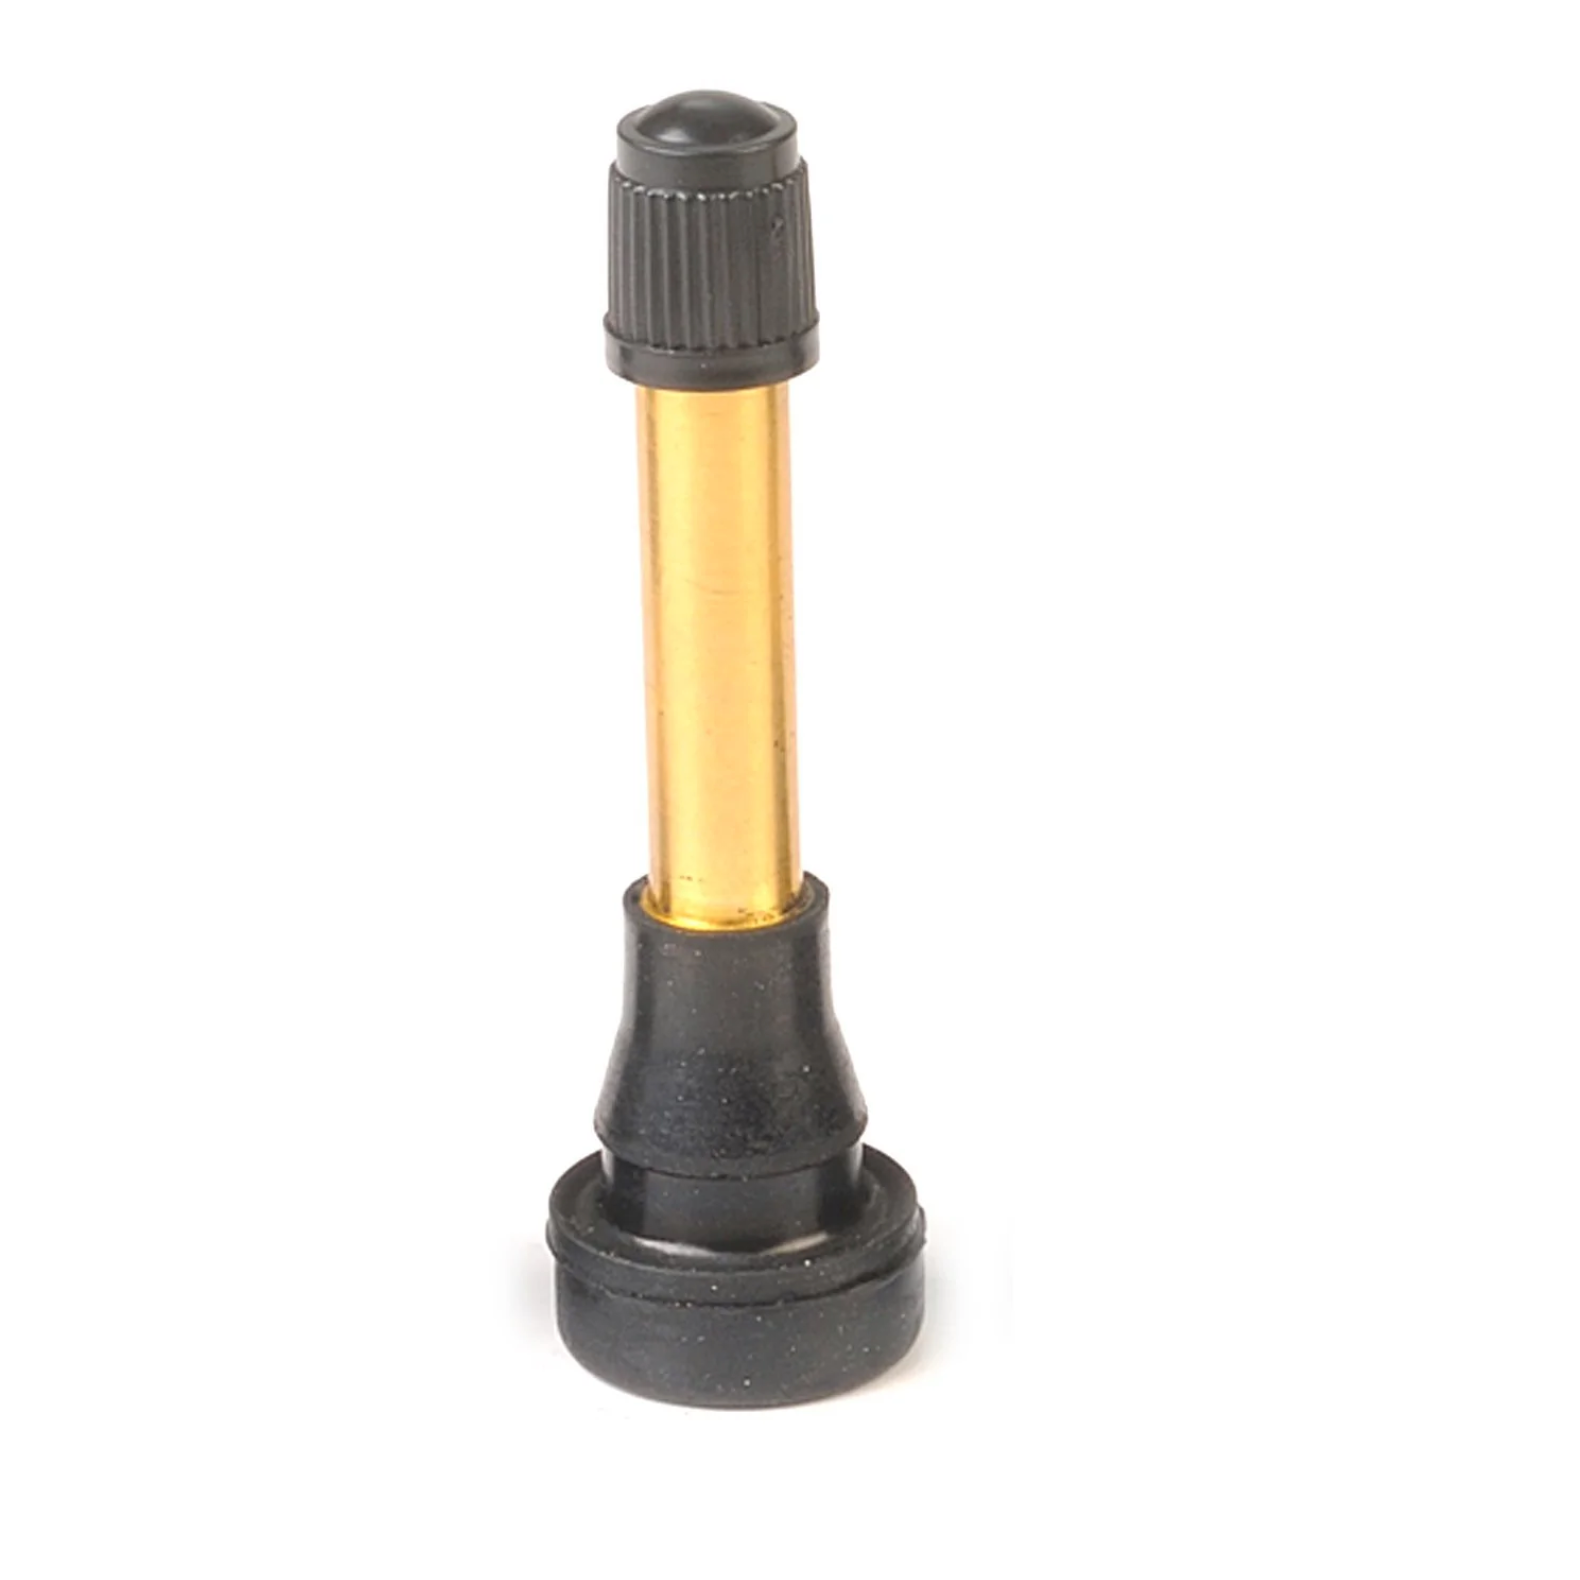 602 High Pressure Rubber Snap-in Tubless Tire Valve Stems, For 0.453" Valve Stem Hole | TR602HP